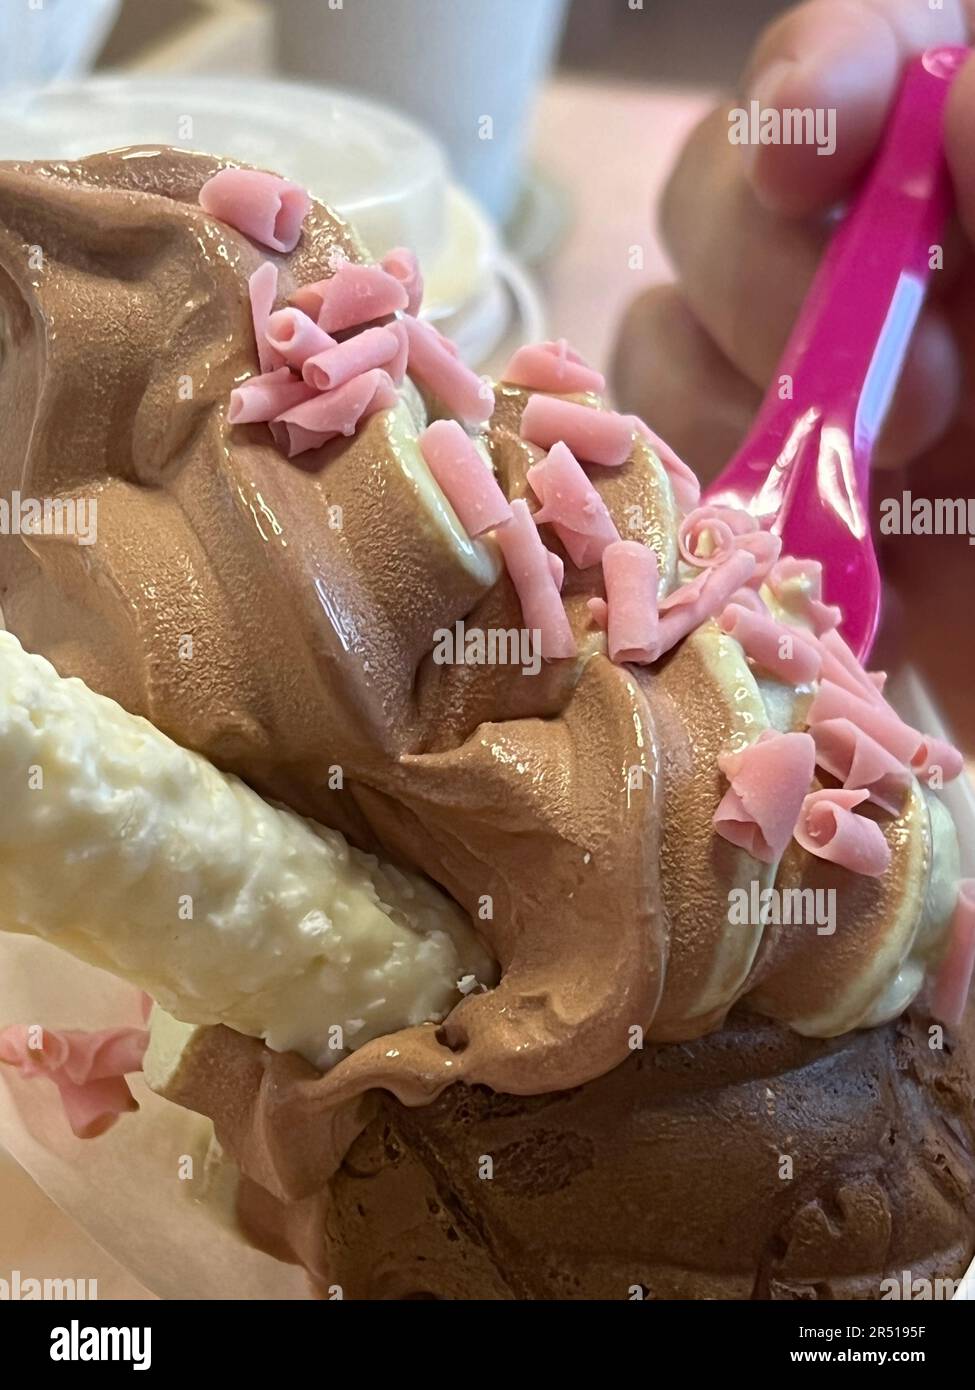 chocolate ice cream decorated with a pink spoon. Stock Photo